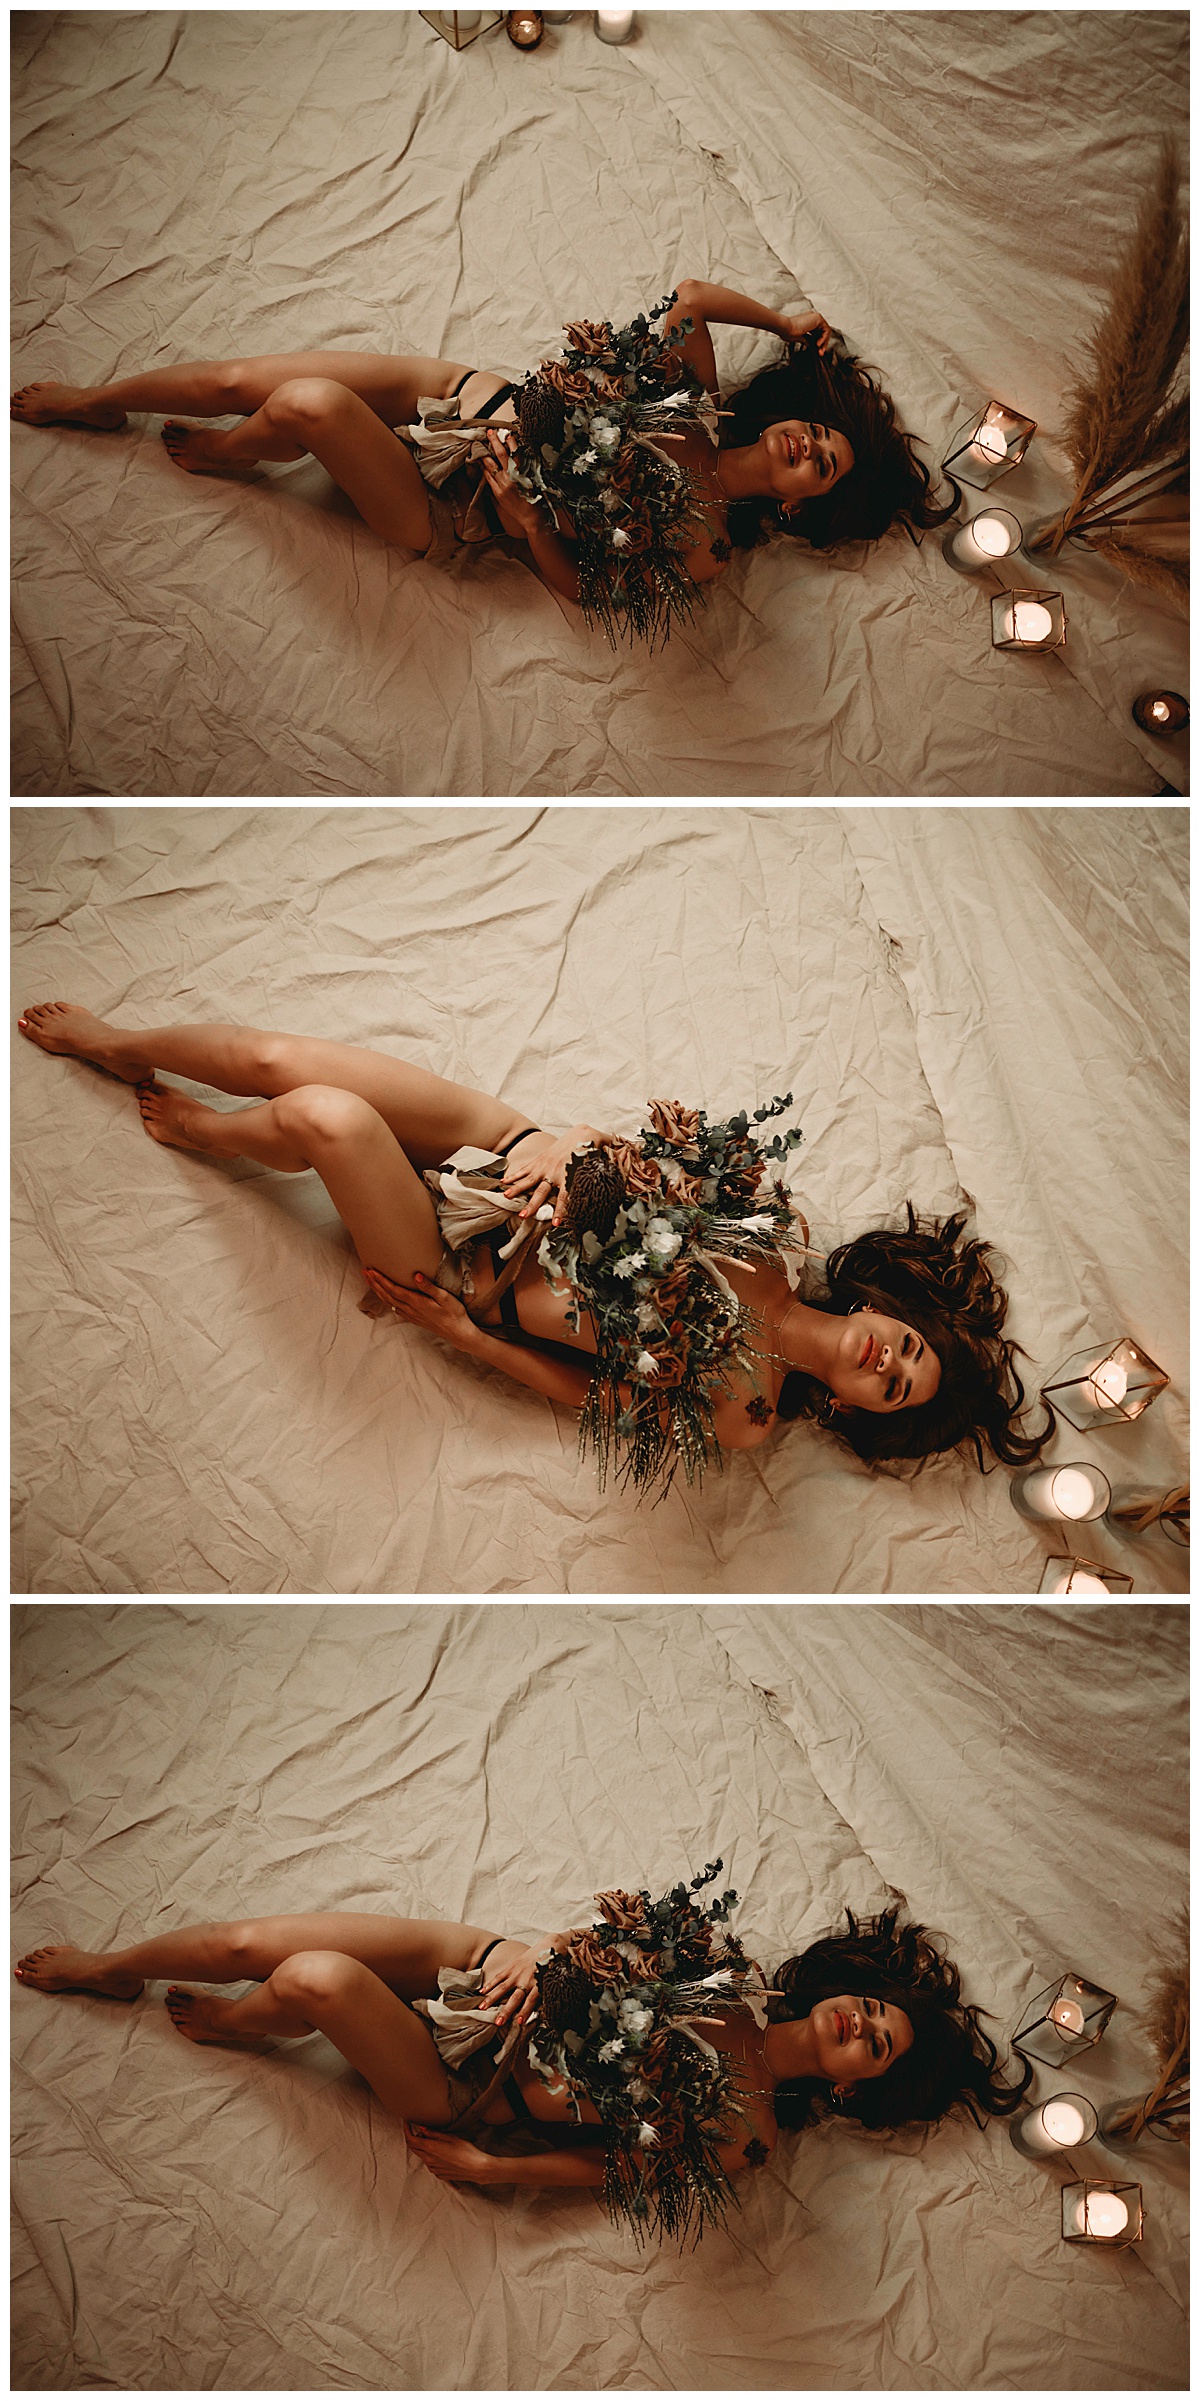 Woman lays on floor covered in floral bouquet for Throwback Session